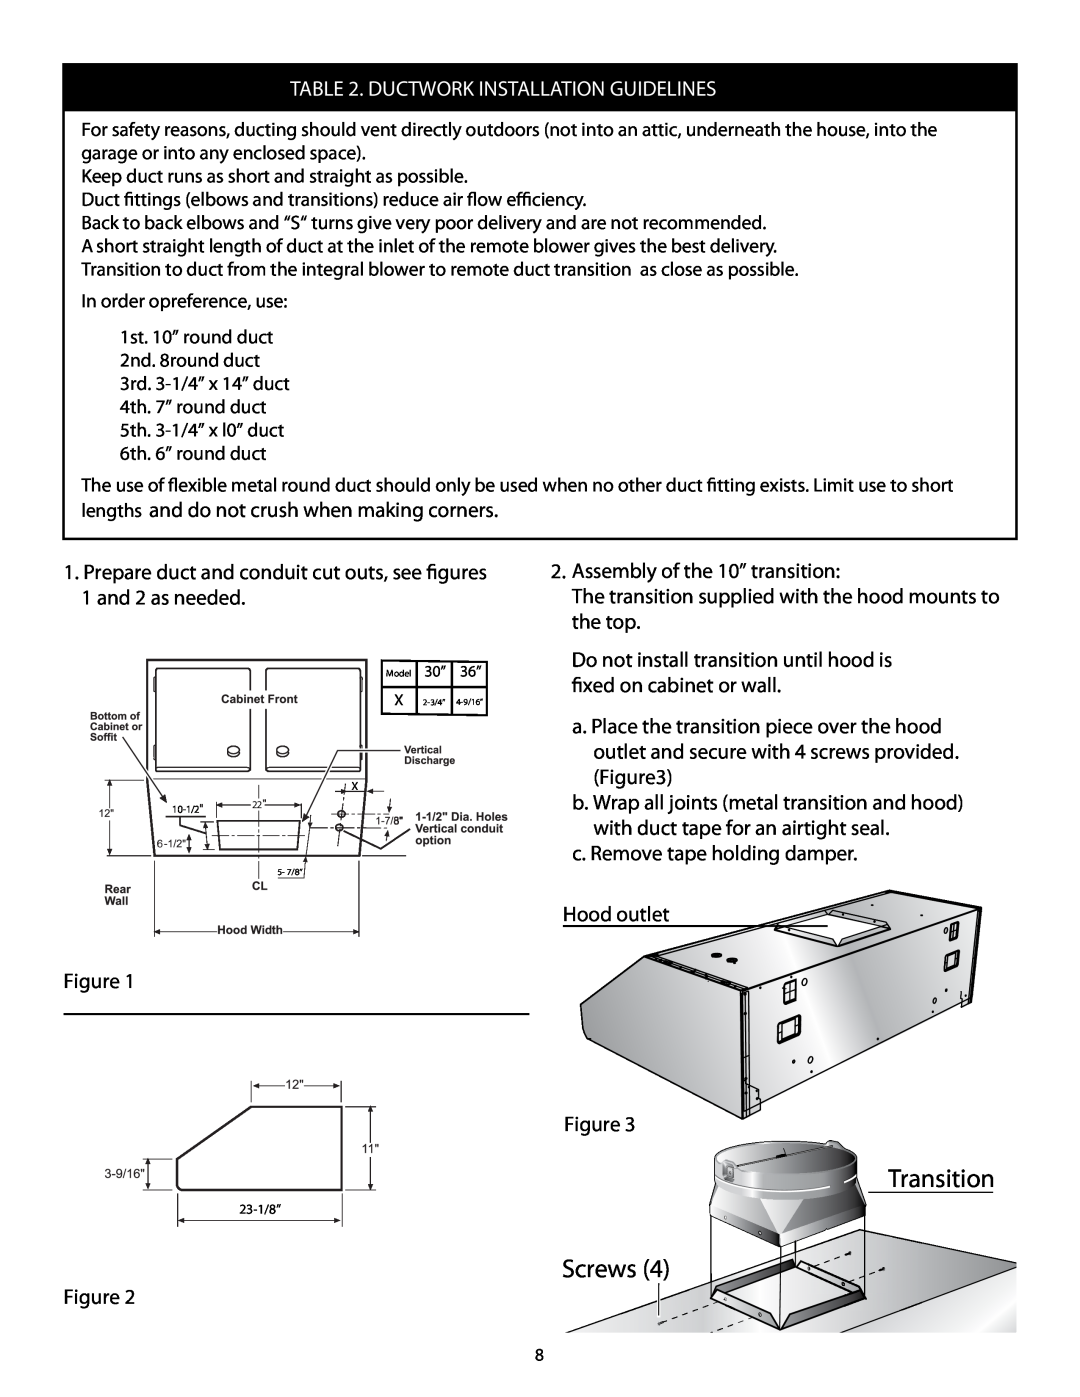 Thermador HMWB36, HMWB30 installation manual Transition Screws, Ductwork Installation Guidelines 